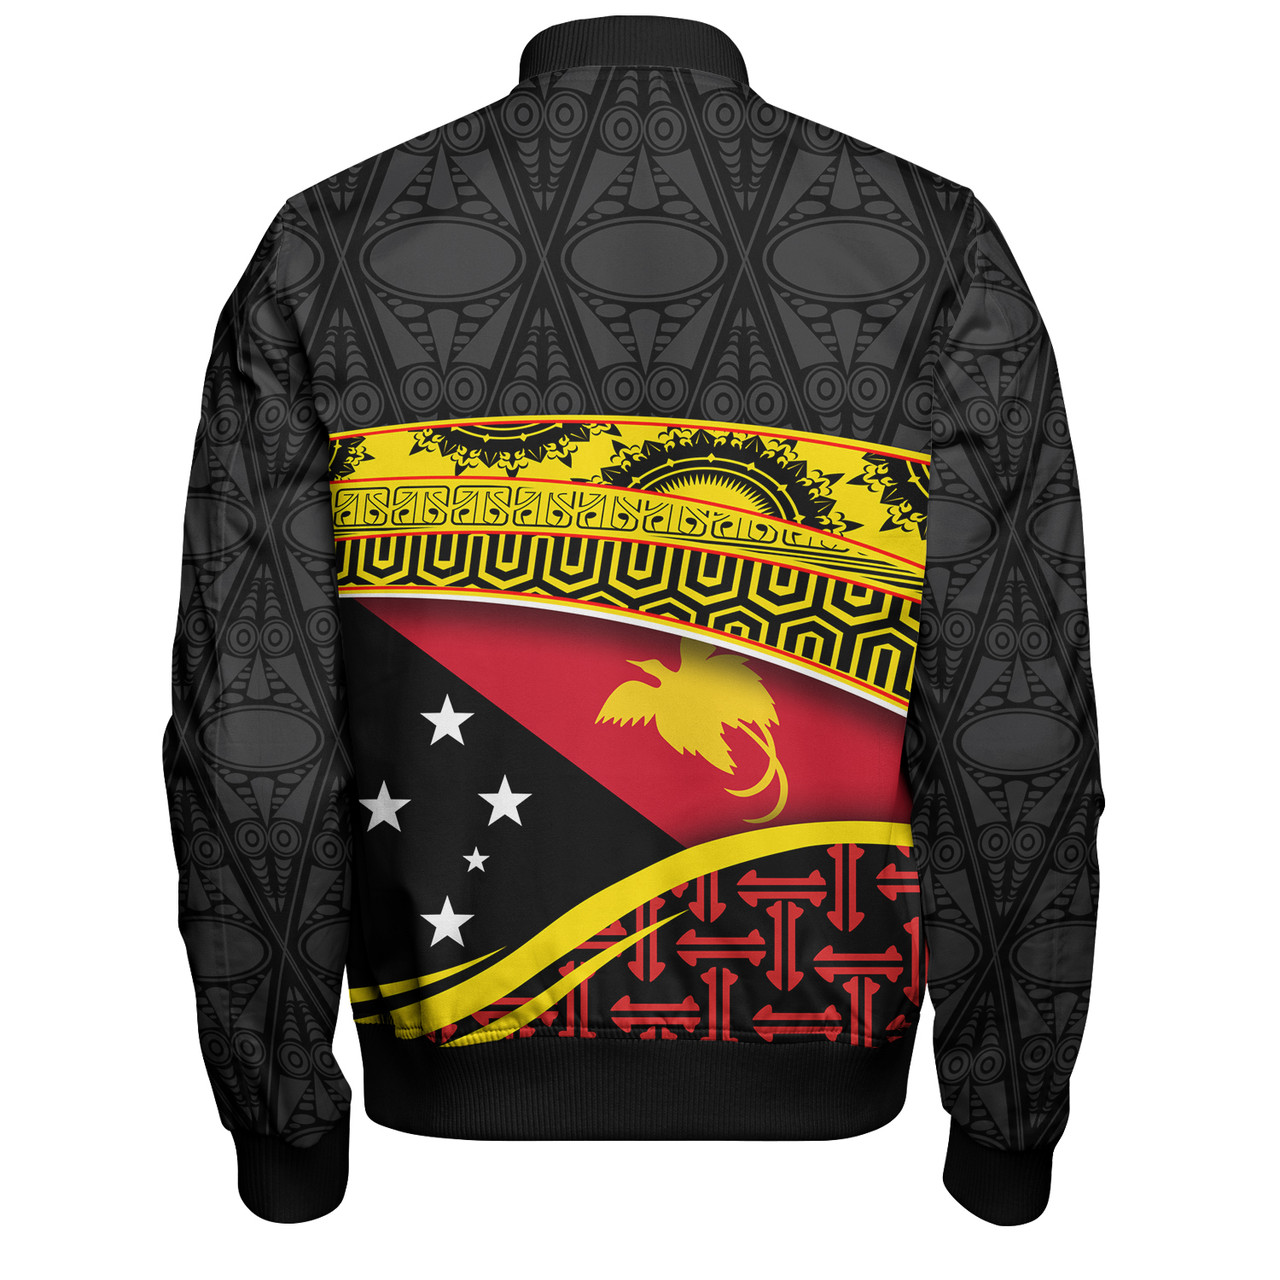 Papua New Guinea Custom Personalized Bomber Jacket With Tribal Motif